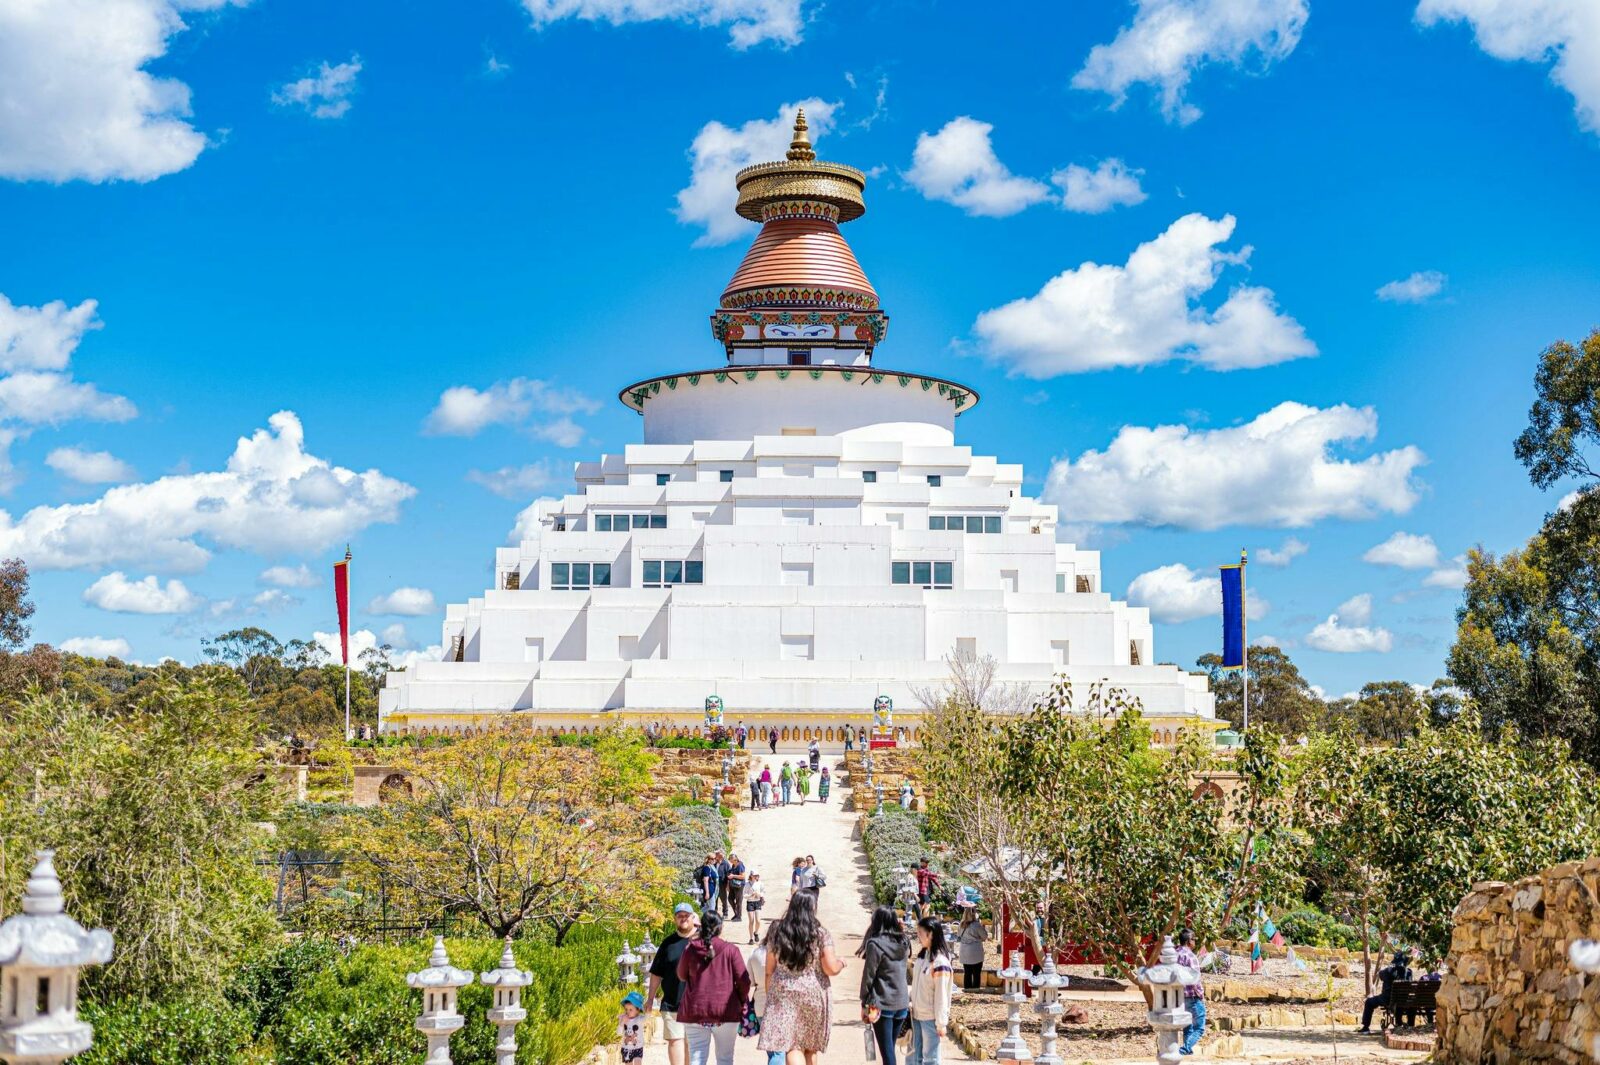 The Great Stupa events